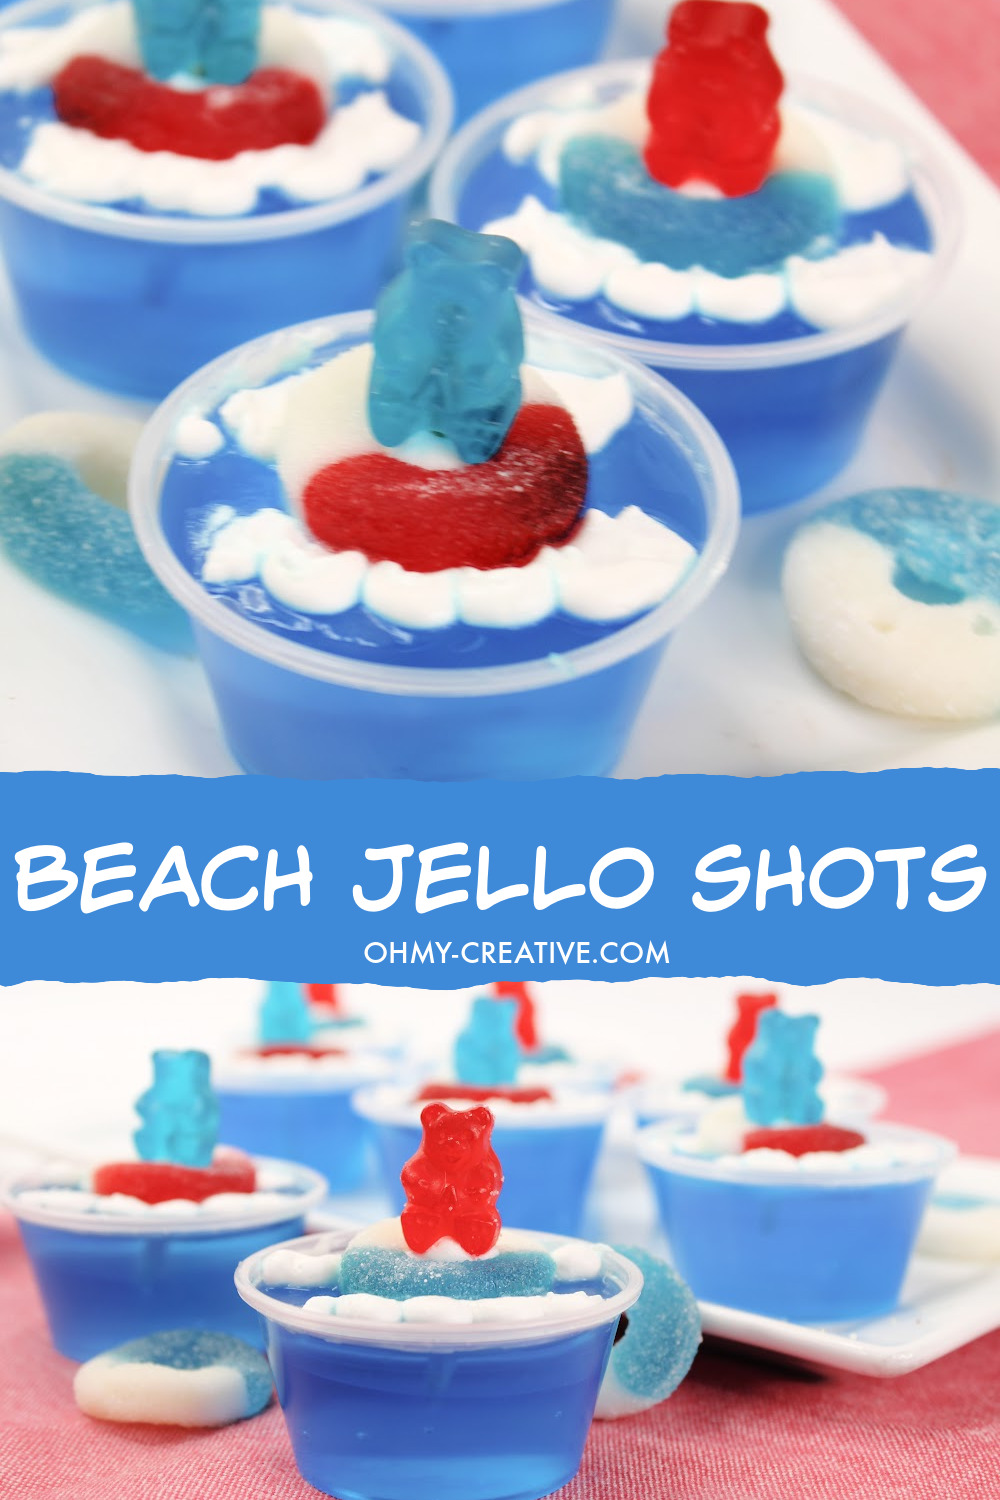 Fun beach party jello shots using gummy bears gummy lifesavers as pool floats in red, white and blue!